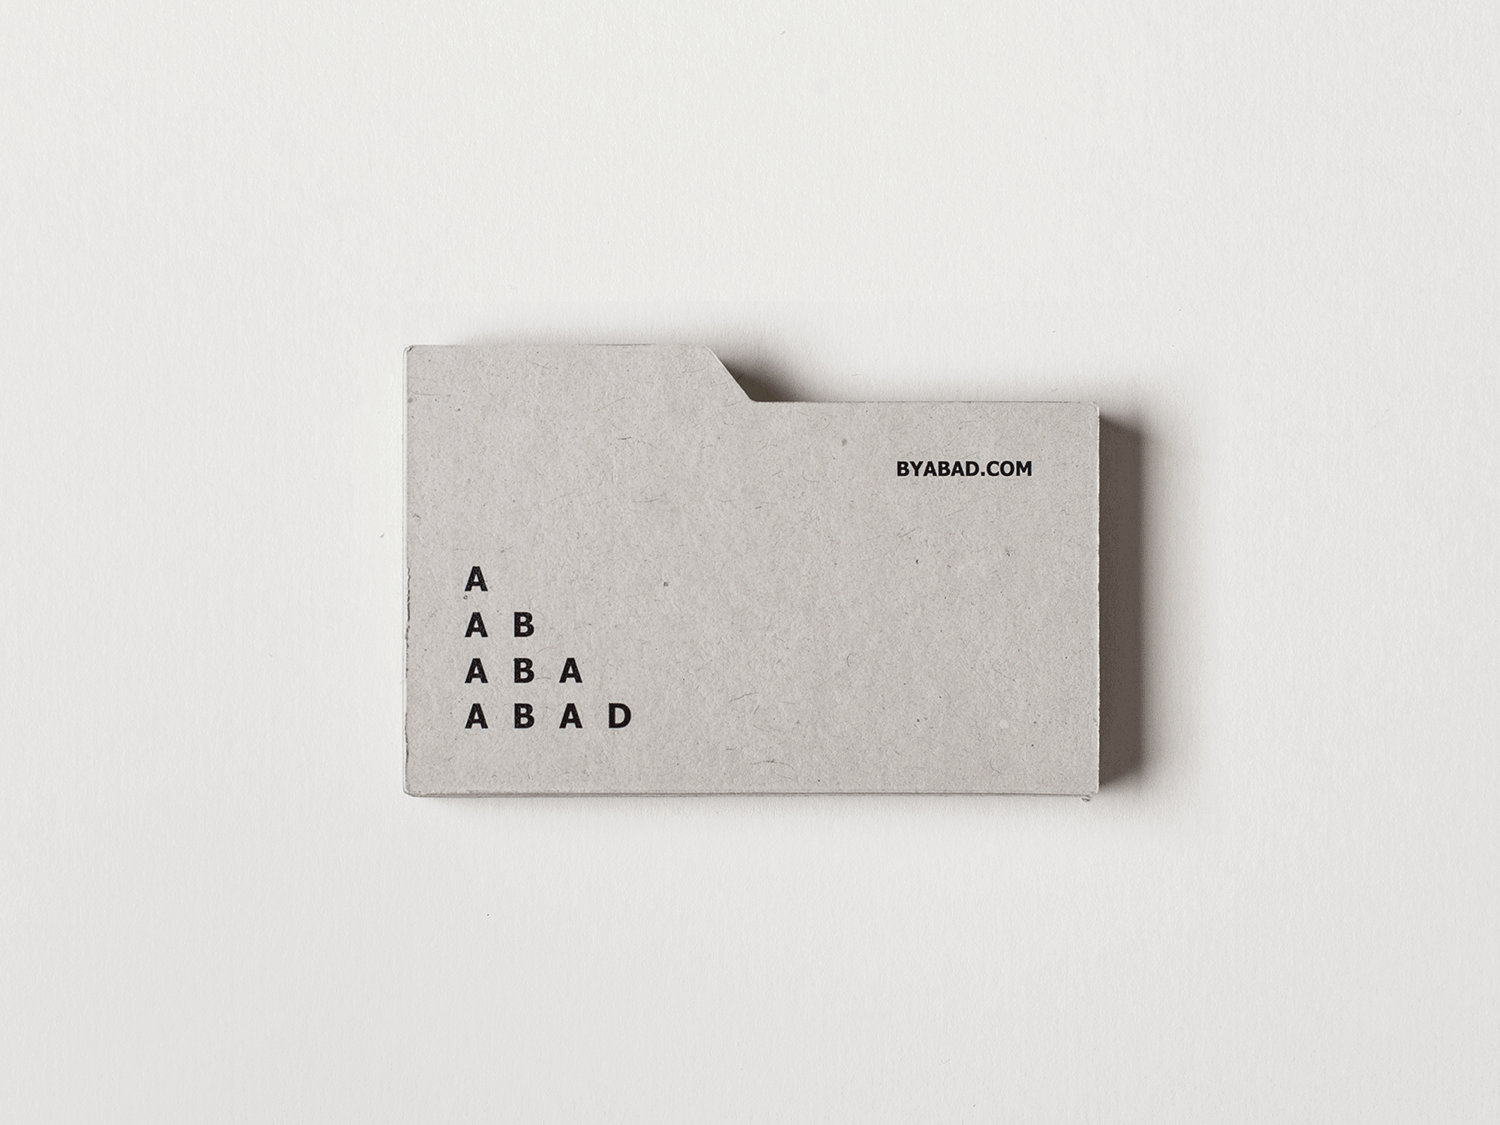 Abad business card